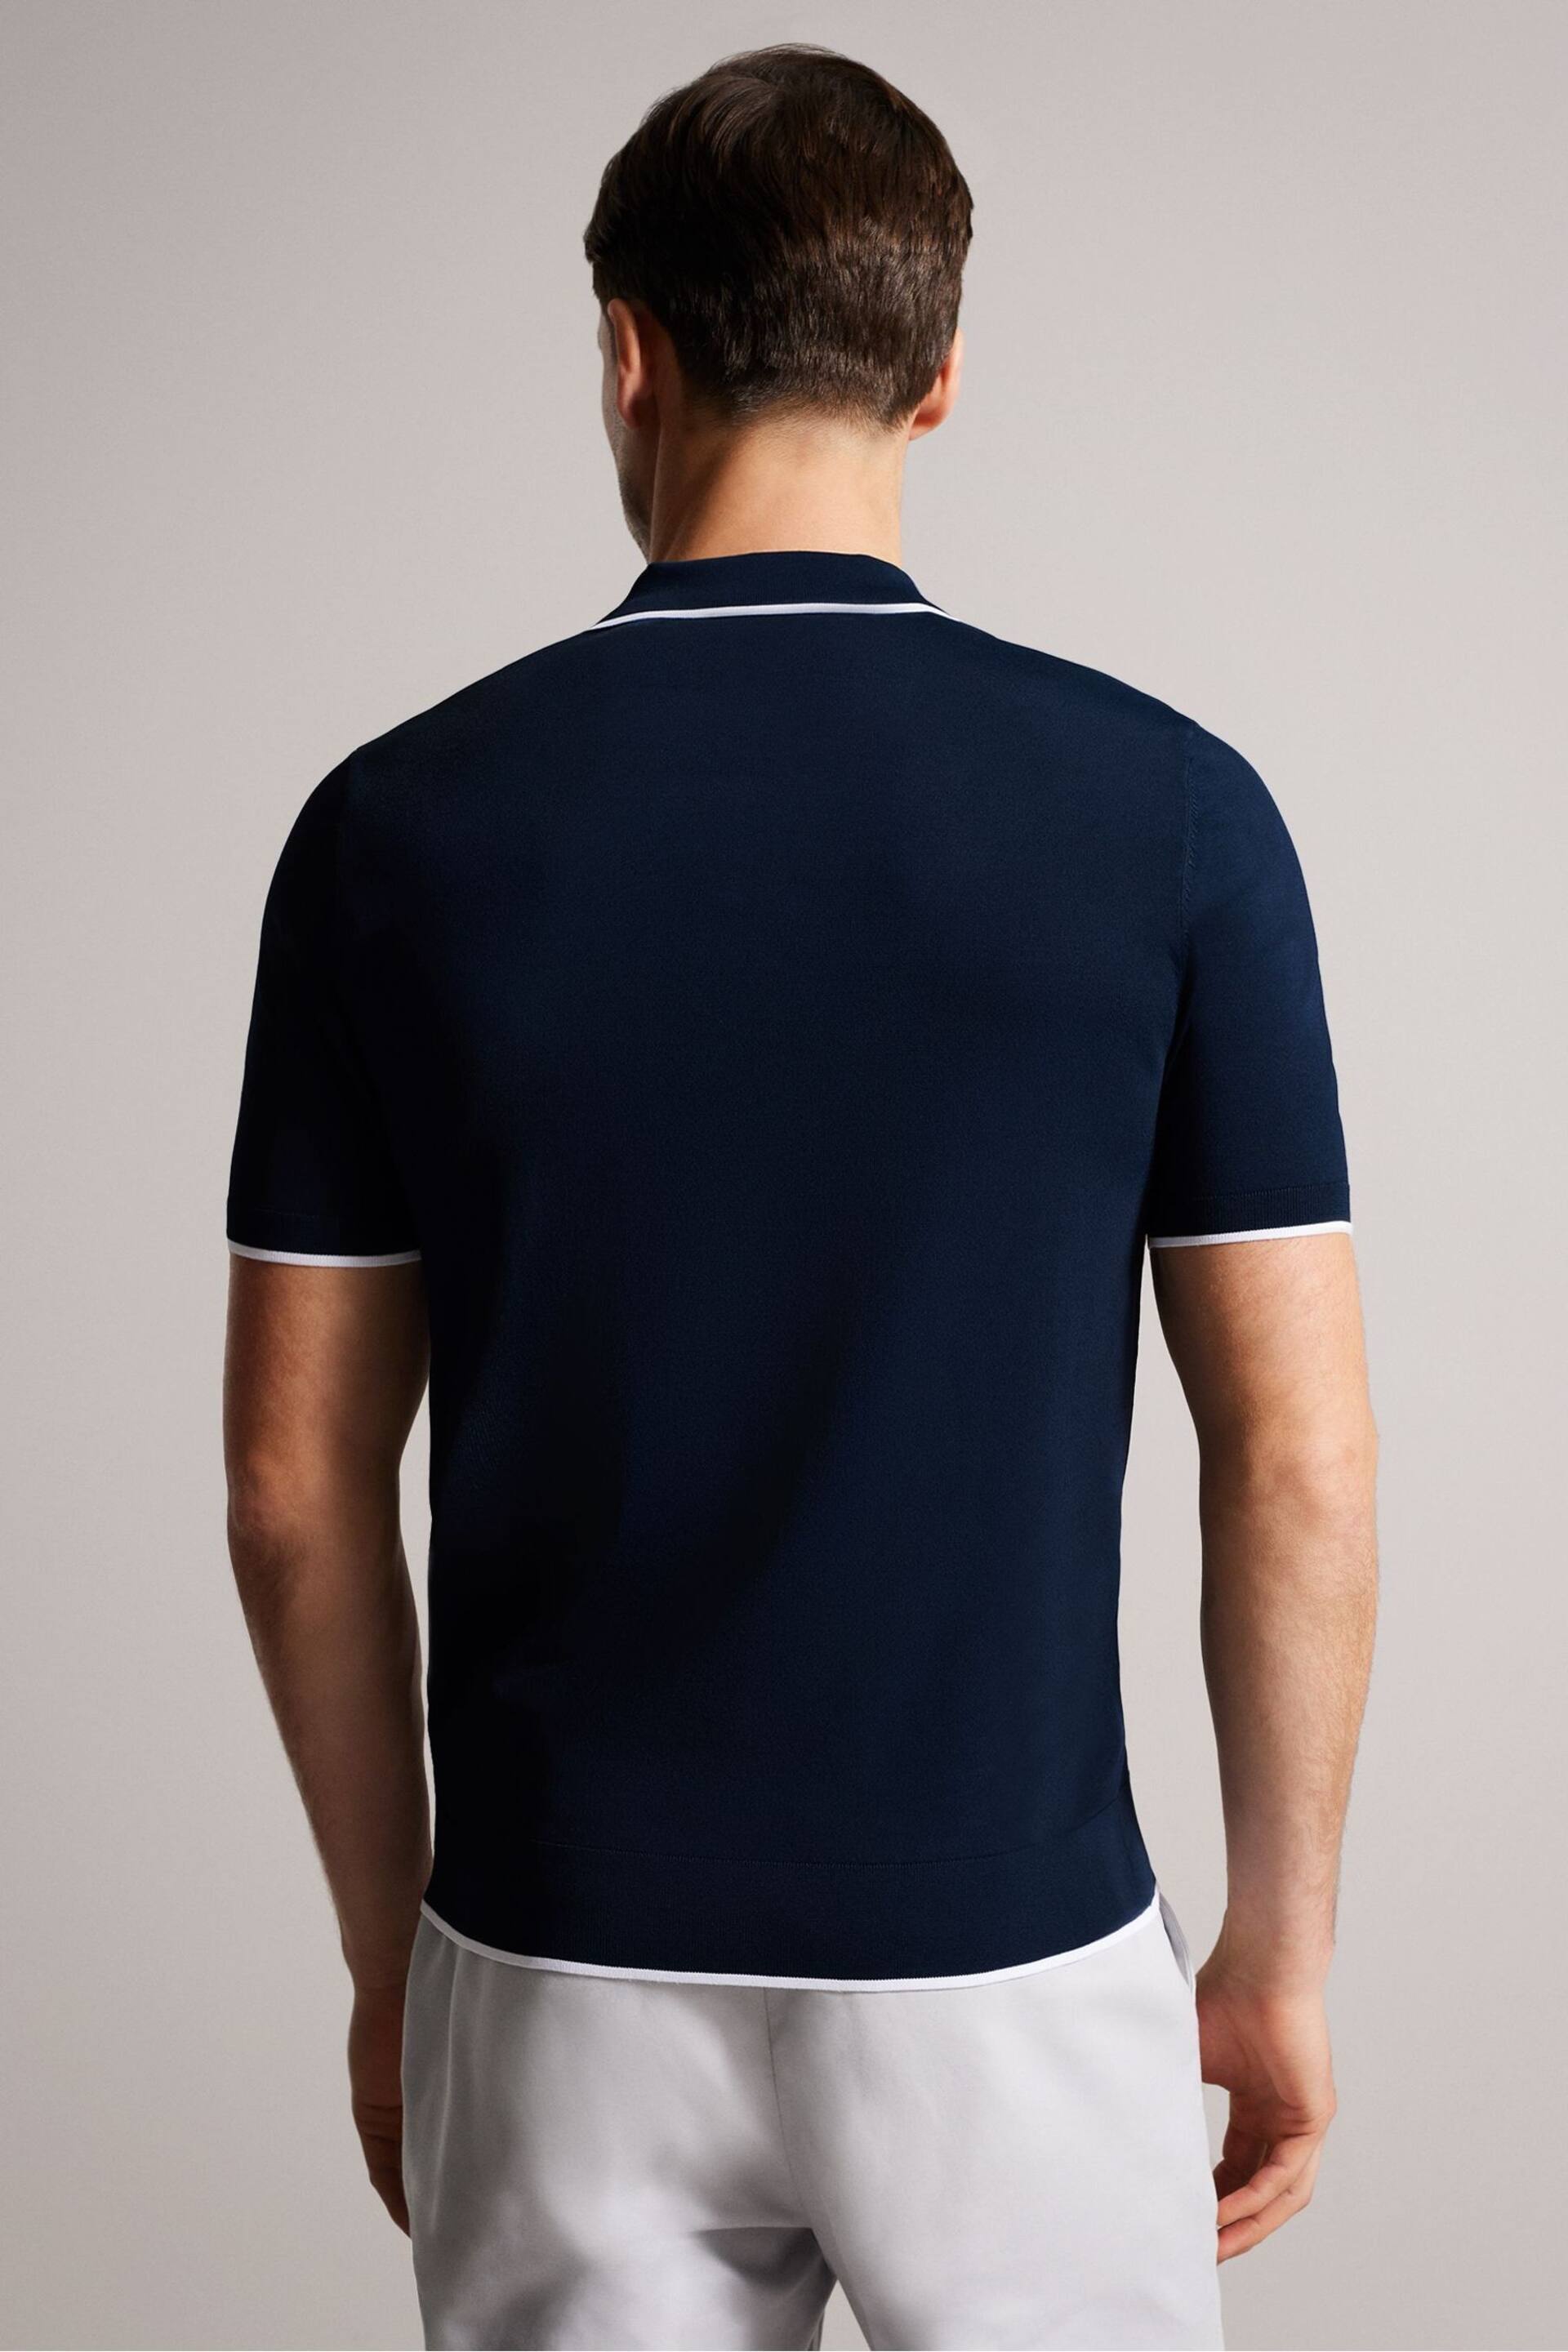 Ted Baker Blue Stortfo Short Sleeved Rayon Open Neck Polo Shirt - Image 5 of 6